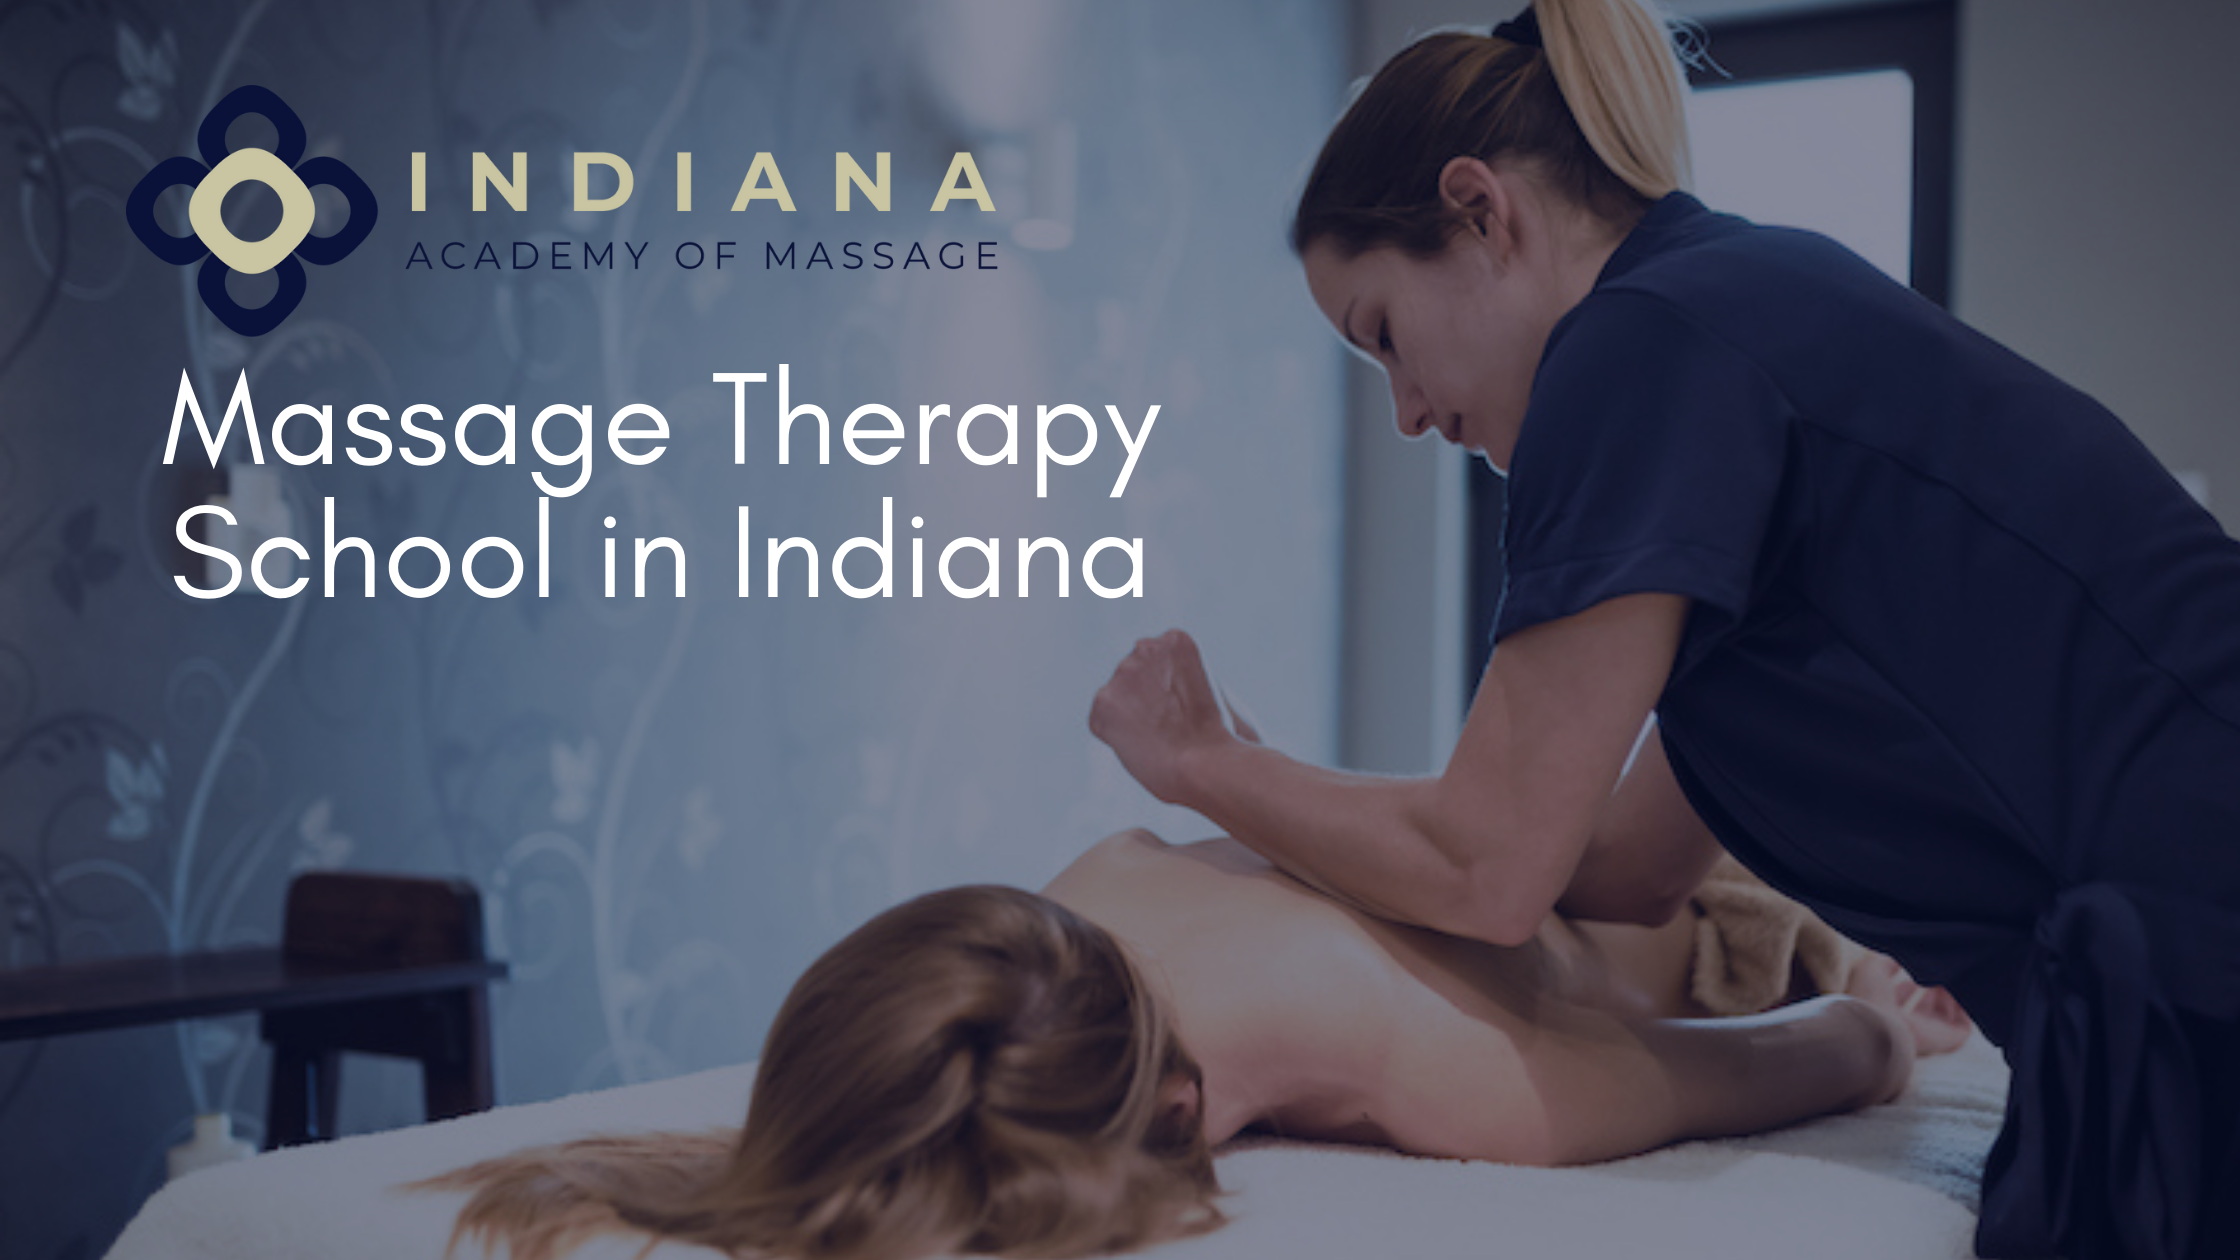 Massage Therapy School in Indiana